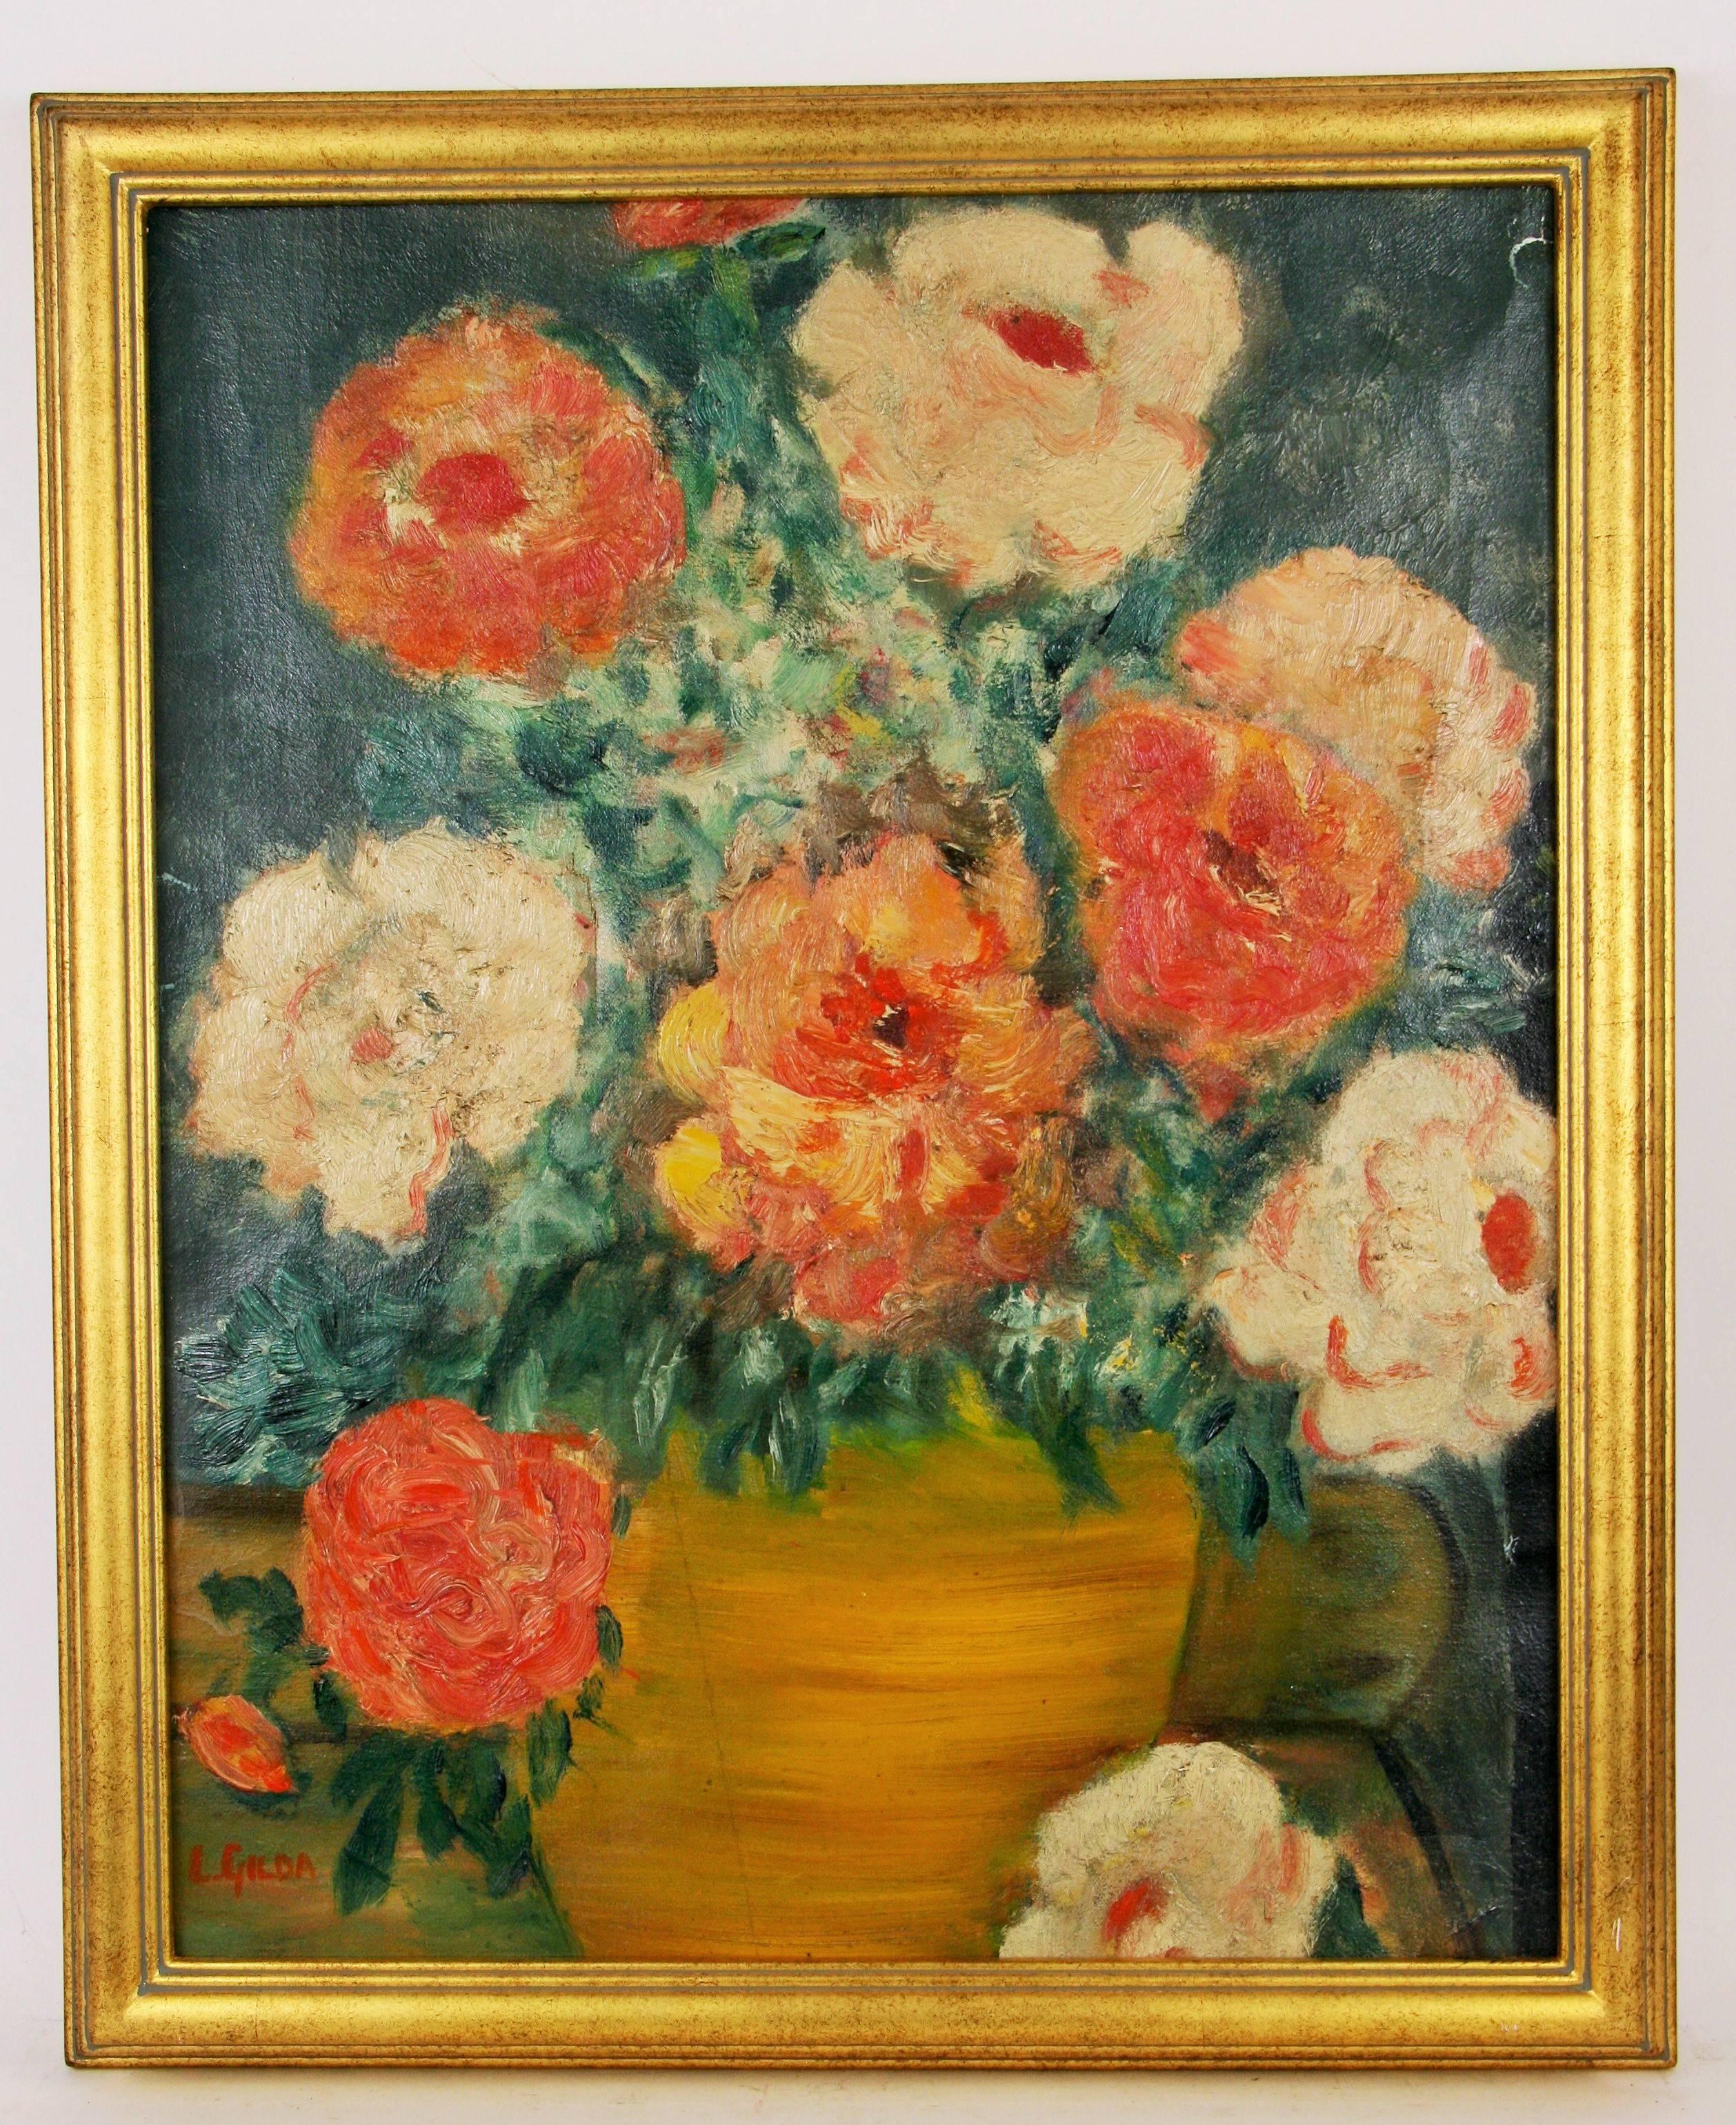 5-2736b Impressionist style floral still life
Displayed in a gilt wood frame
Image size 19.5x15.5